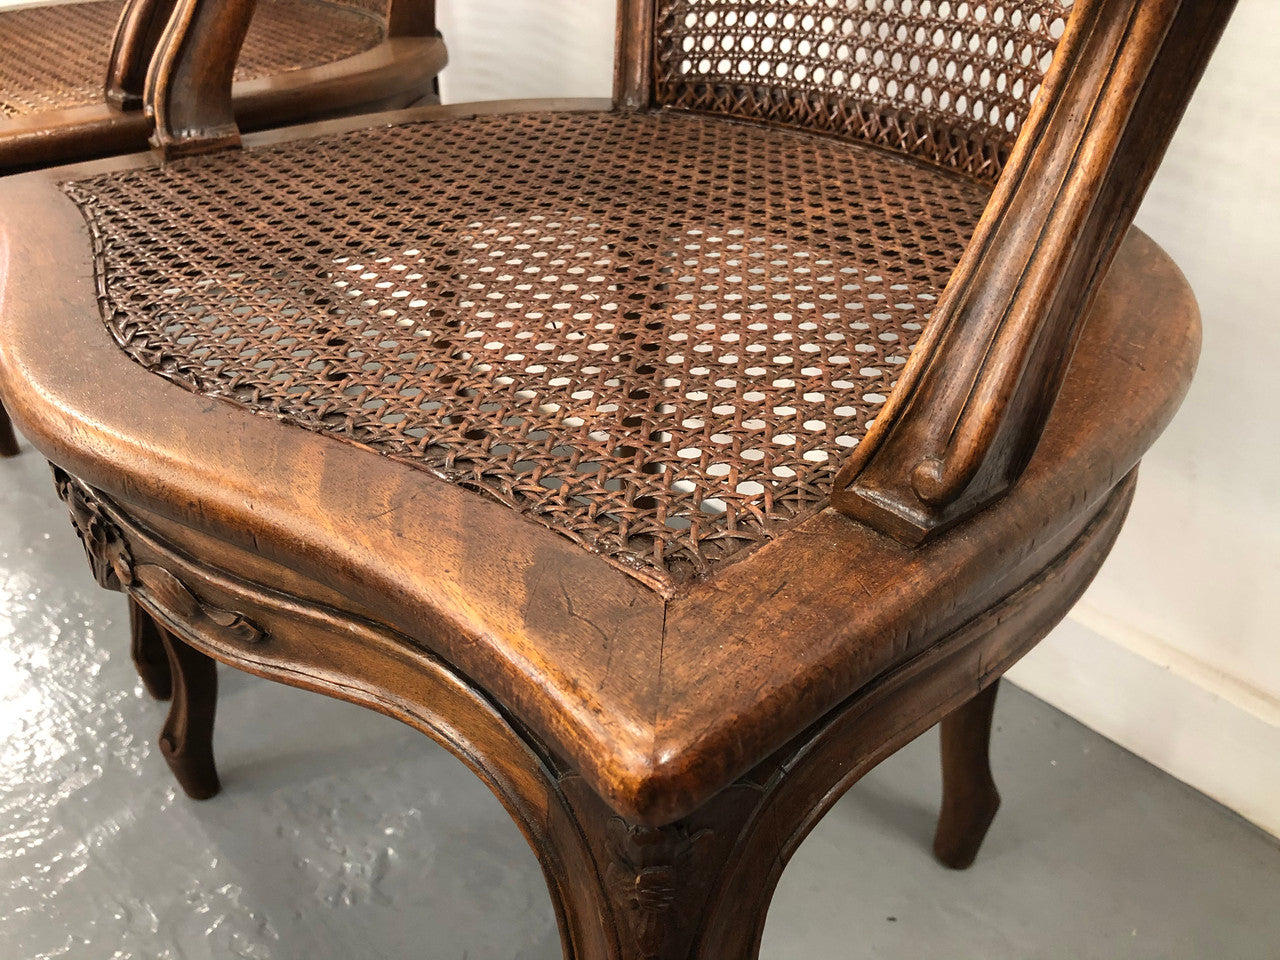 Beautiful Pair Of French Walnut Cane Chairs